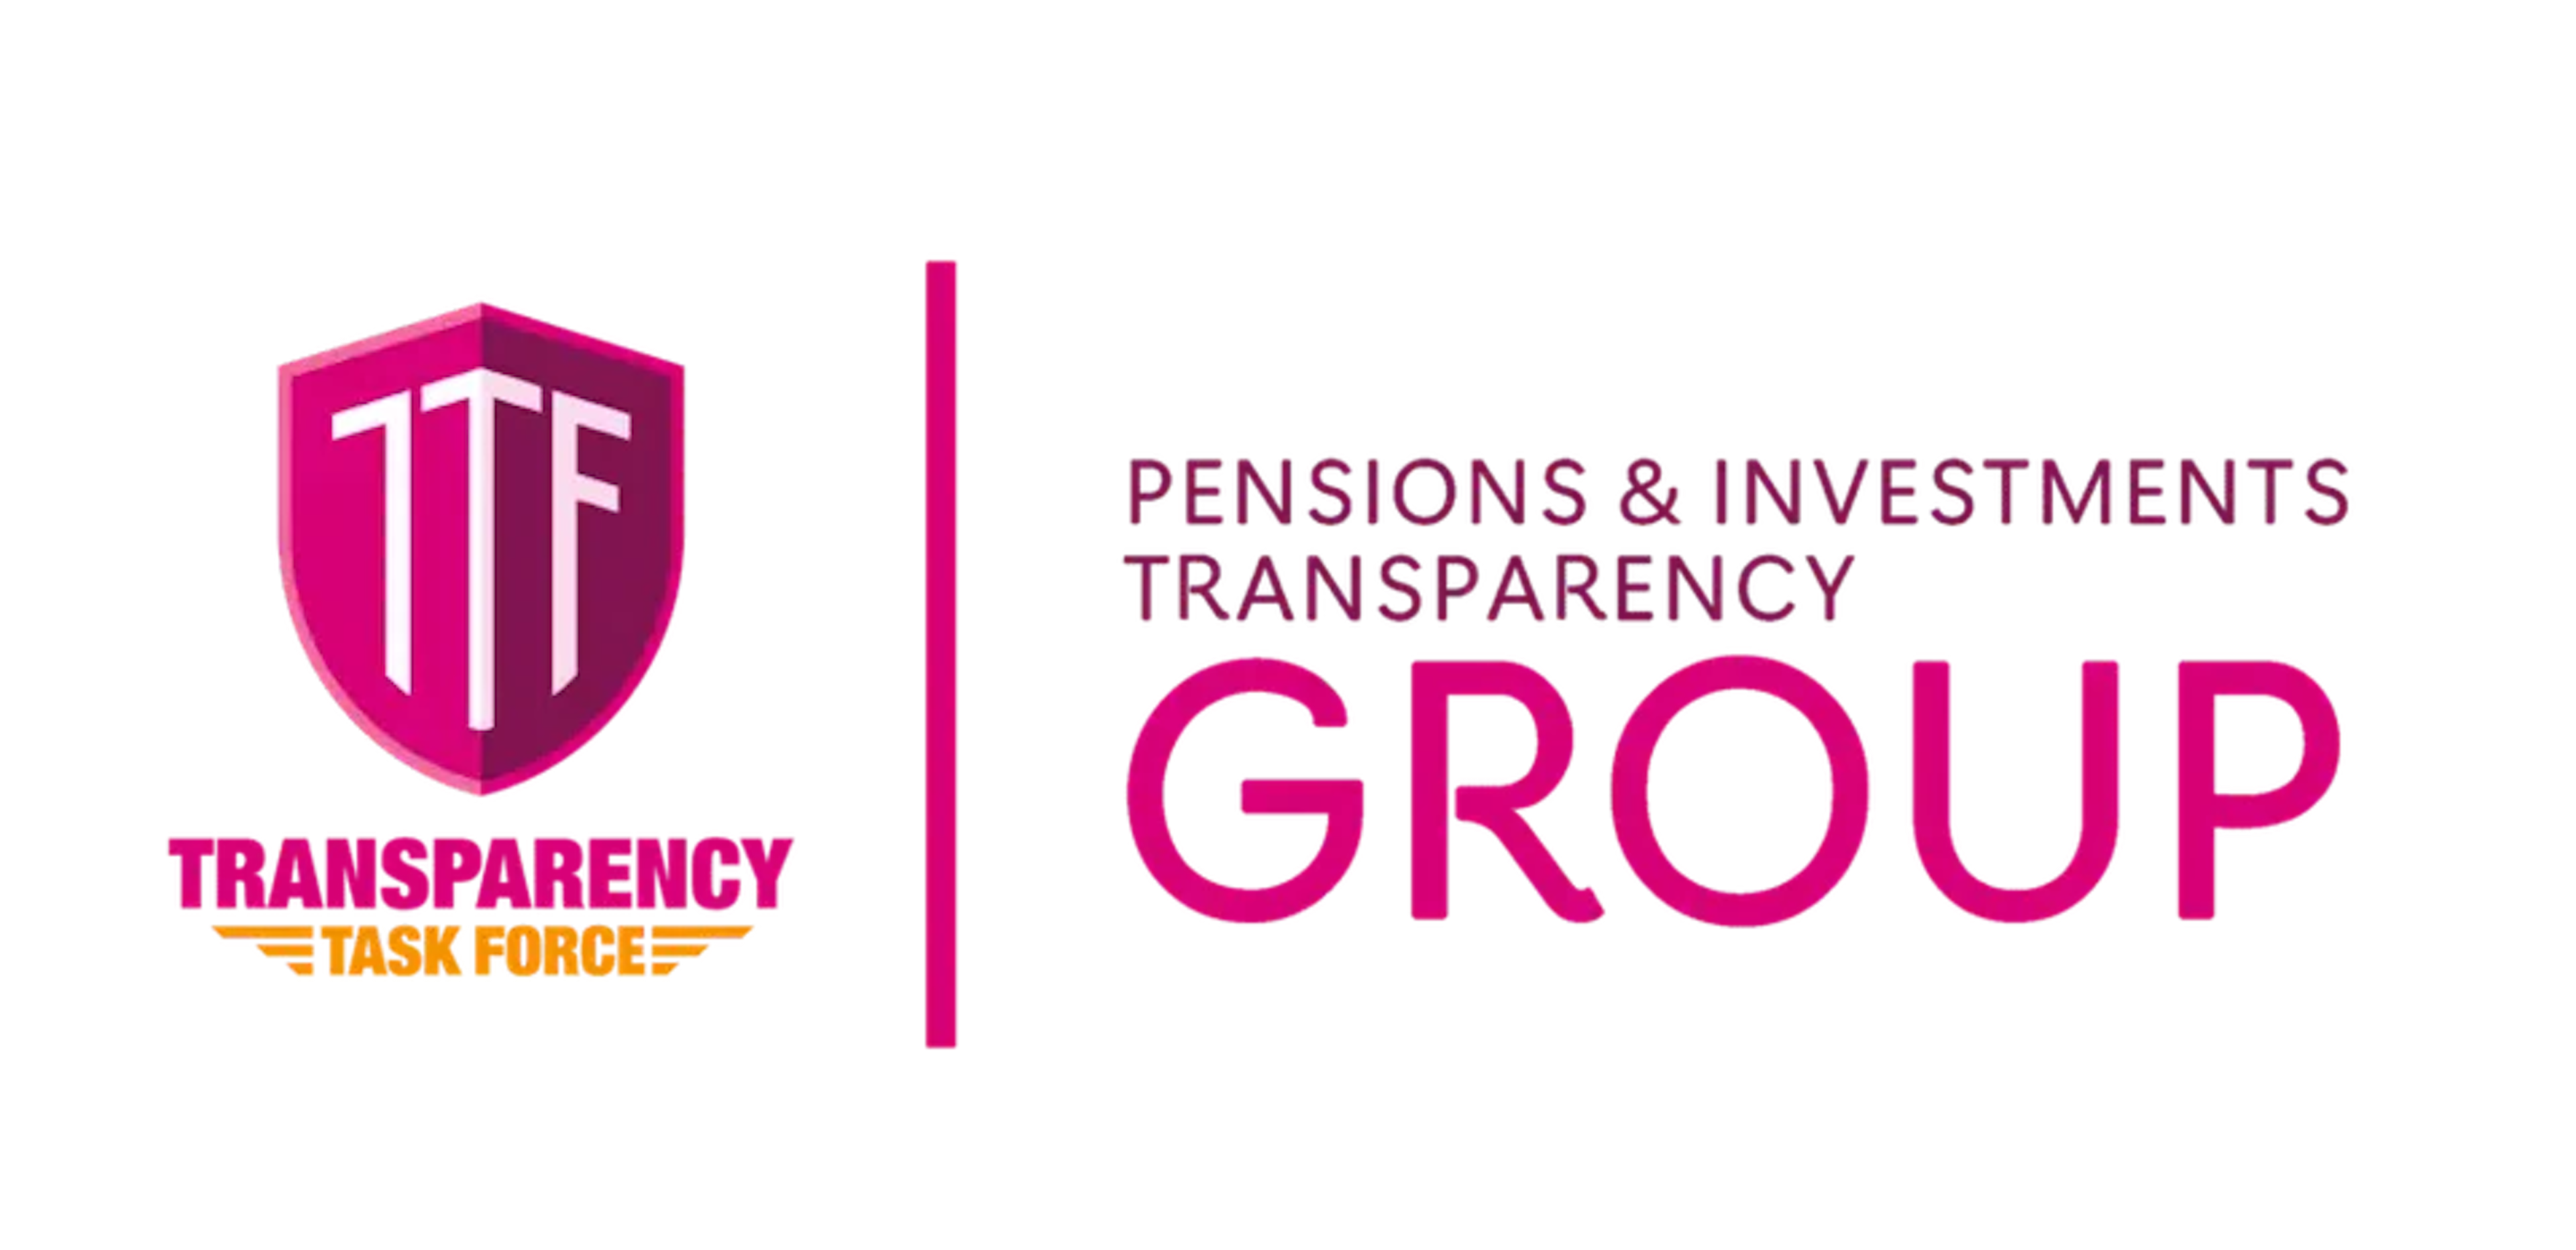 TTFPensionsInvestments&TransparencyGroup.png